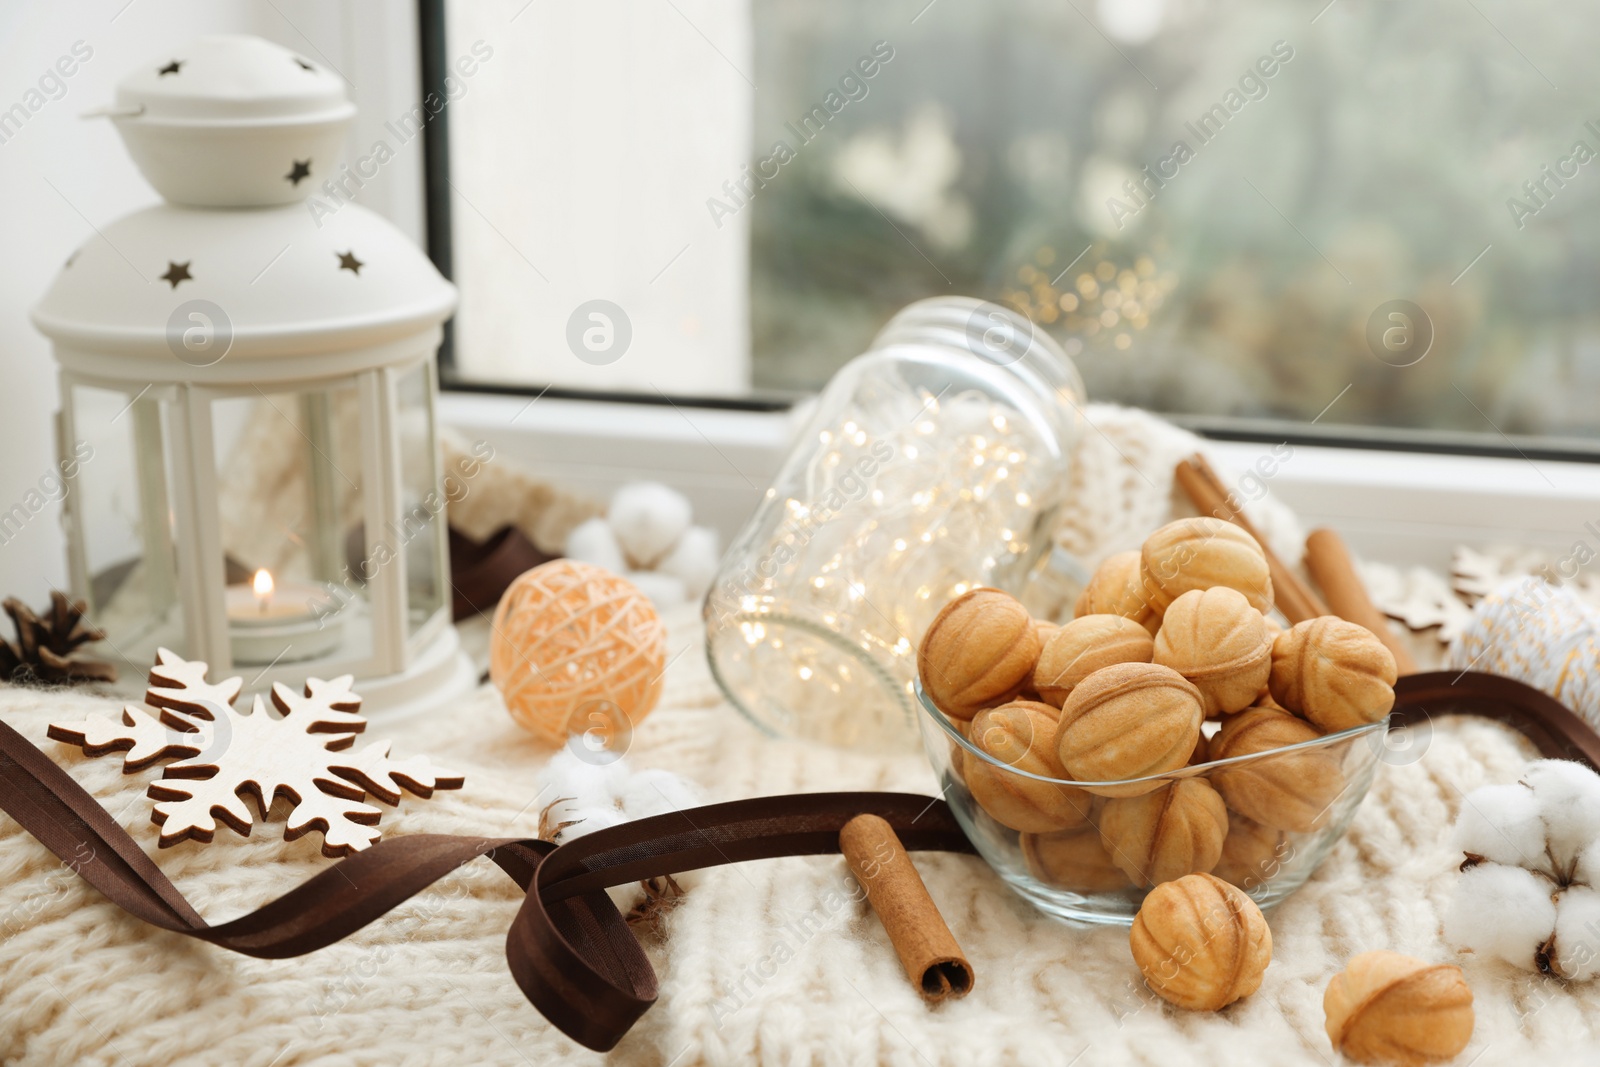 Photo of Delicious nut shaped cookies with boiled condensed milk and Christmas decor on window sill